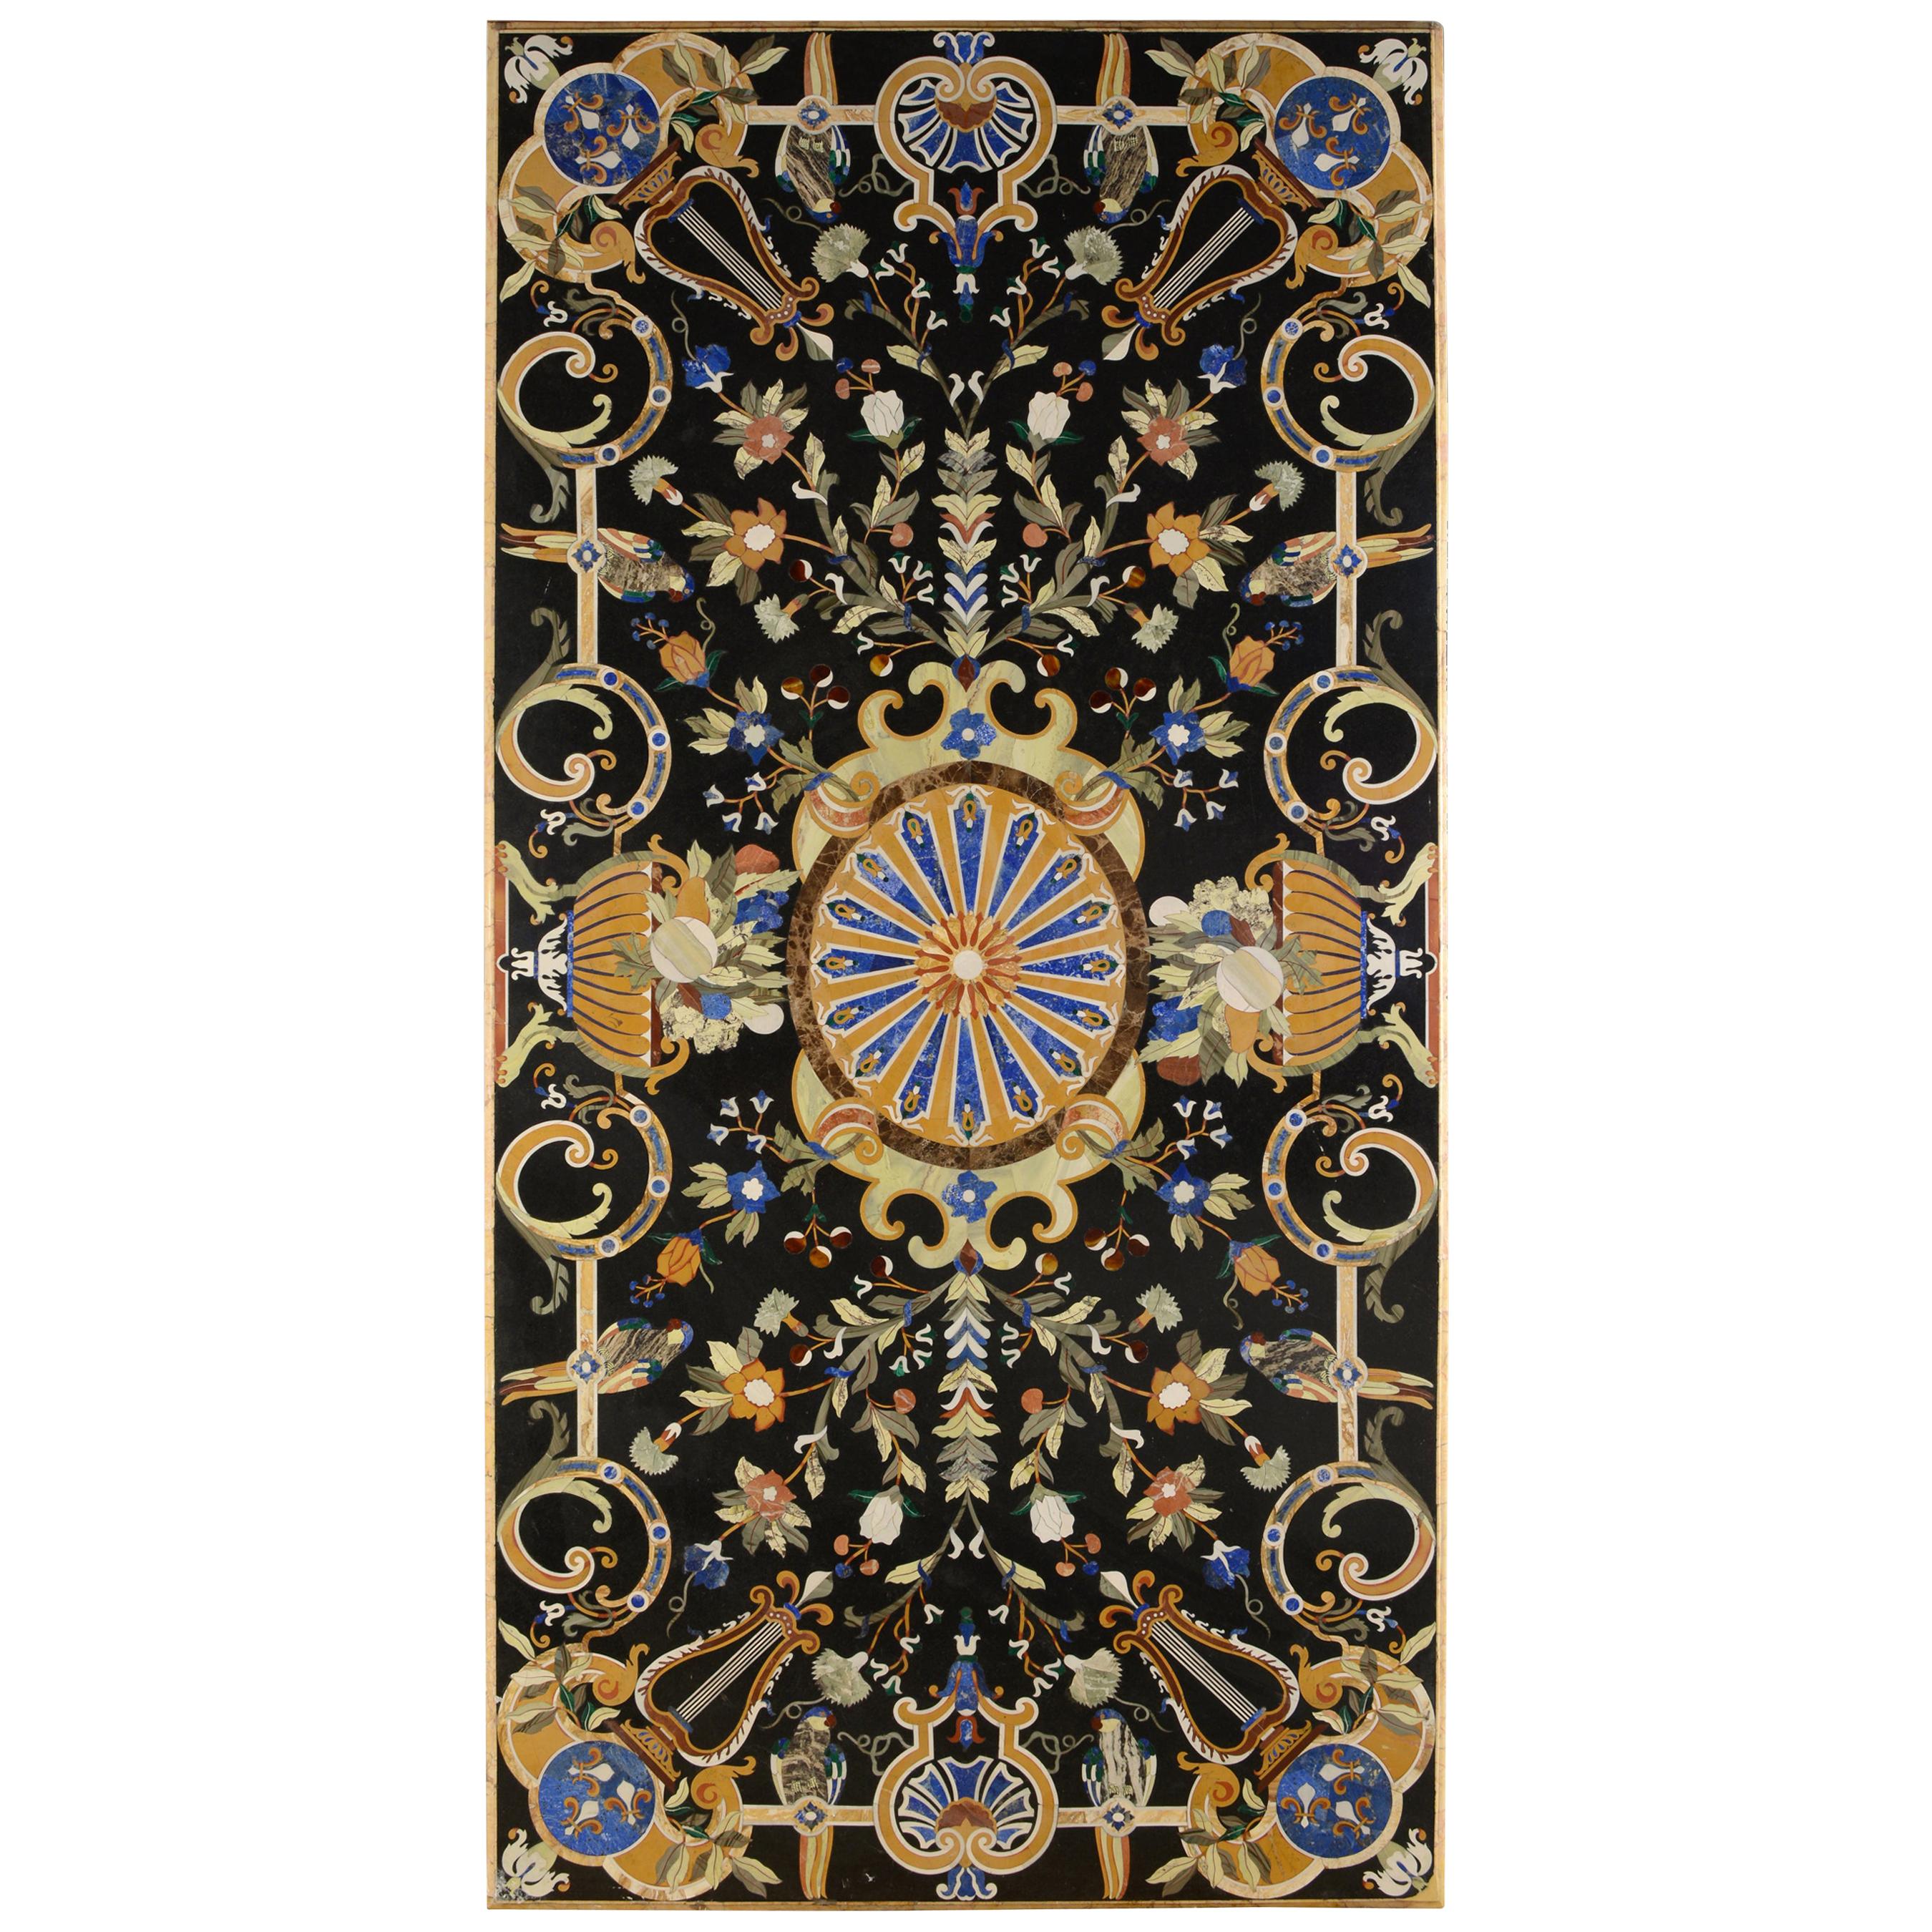 Rectangular Pietra Dura Table Top, Marble and Hard Stones, It Has a Restoration